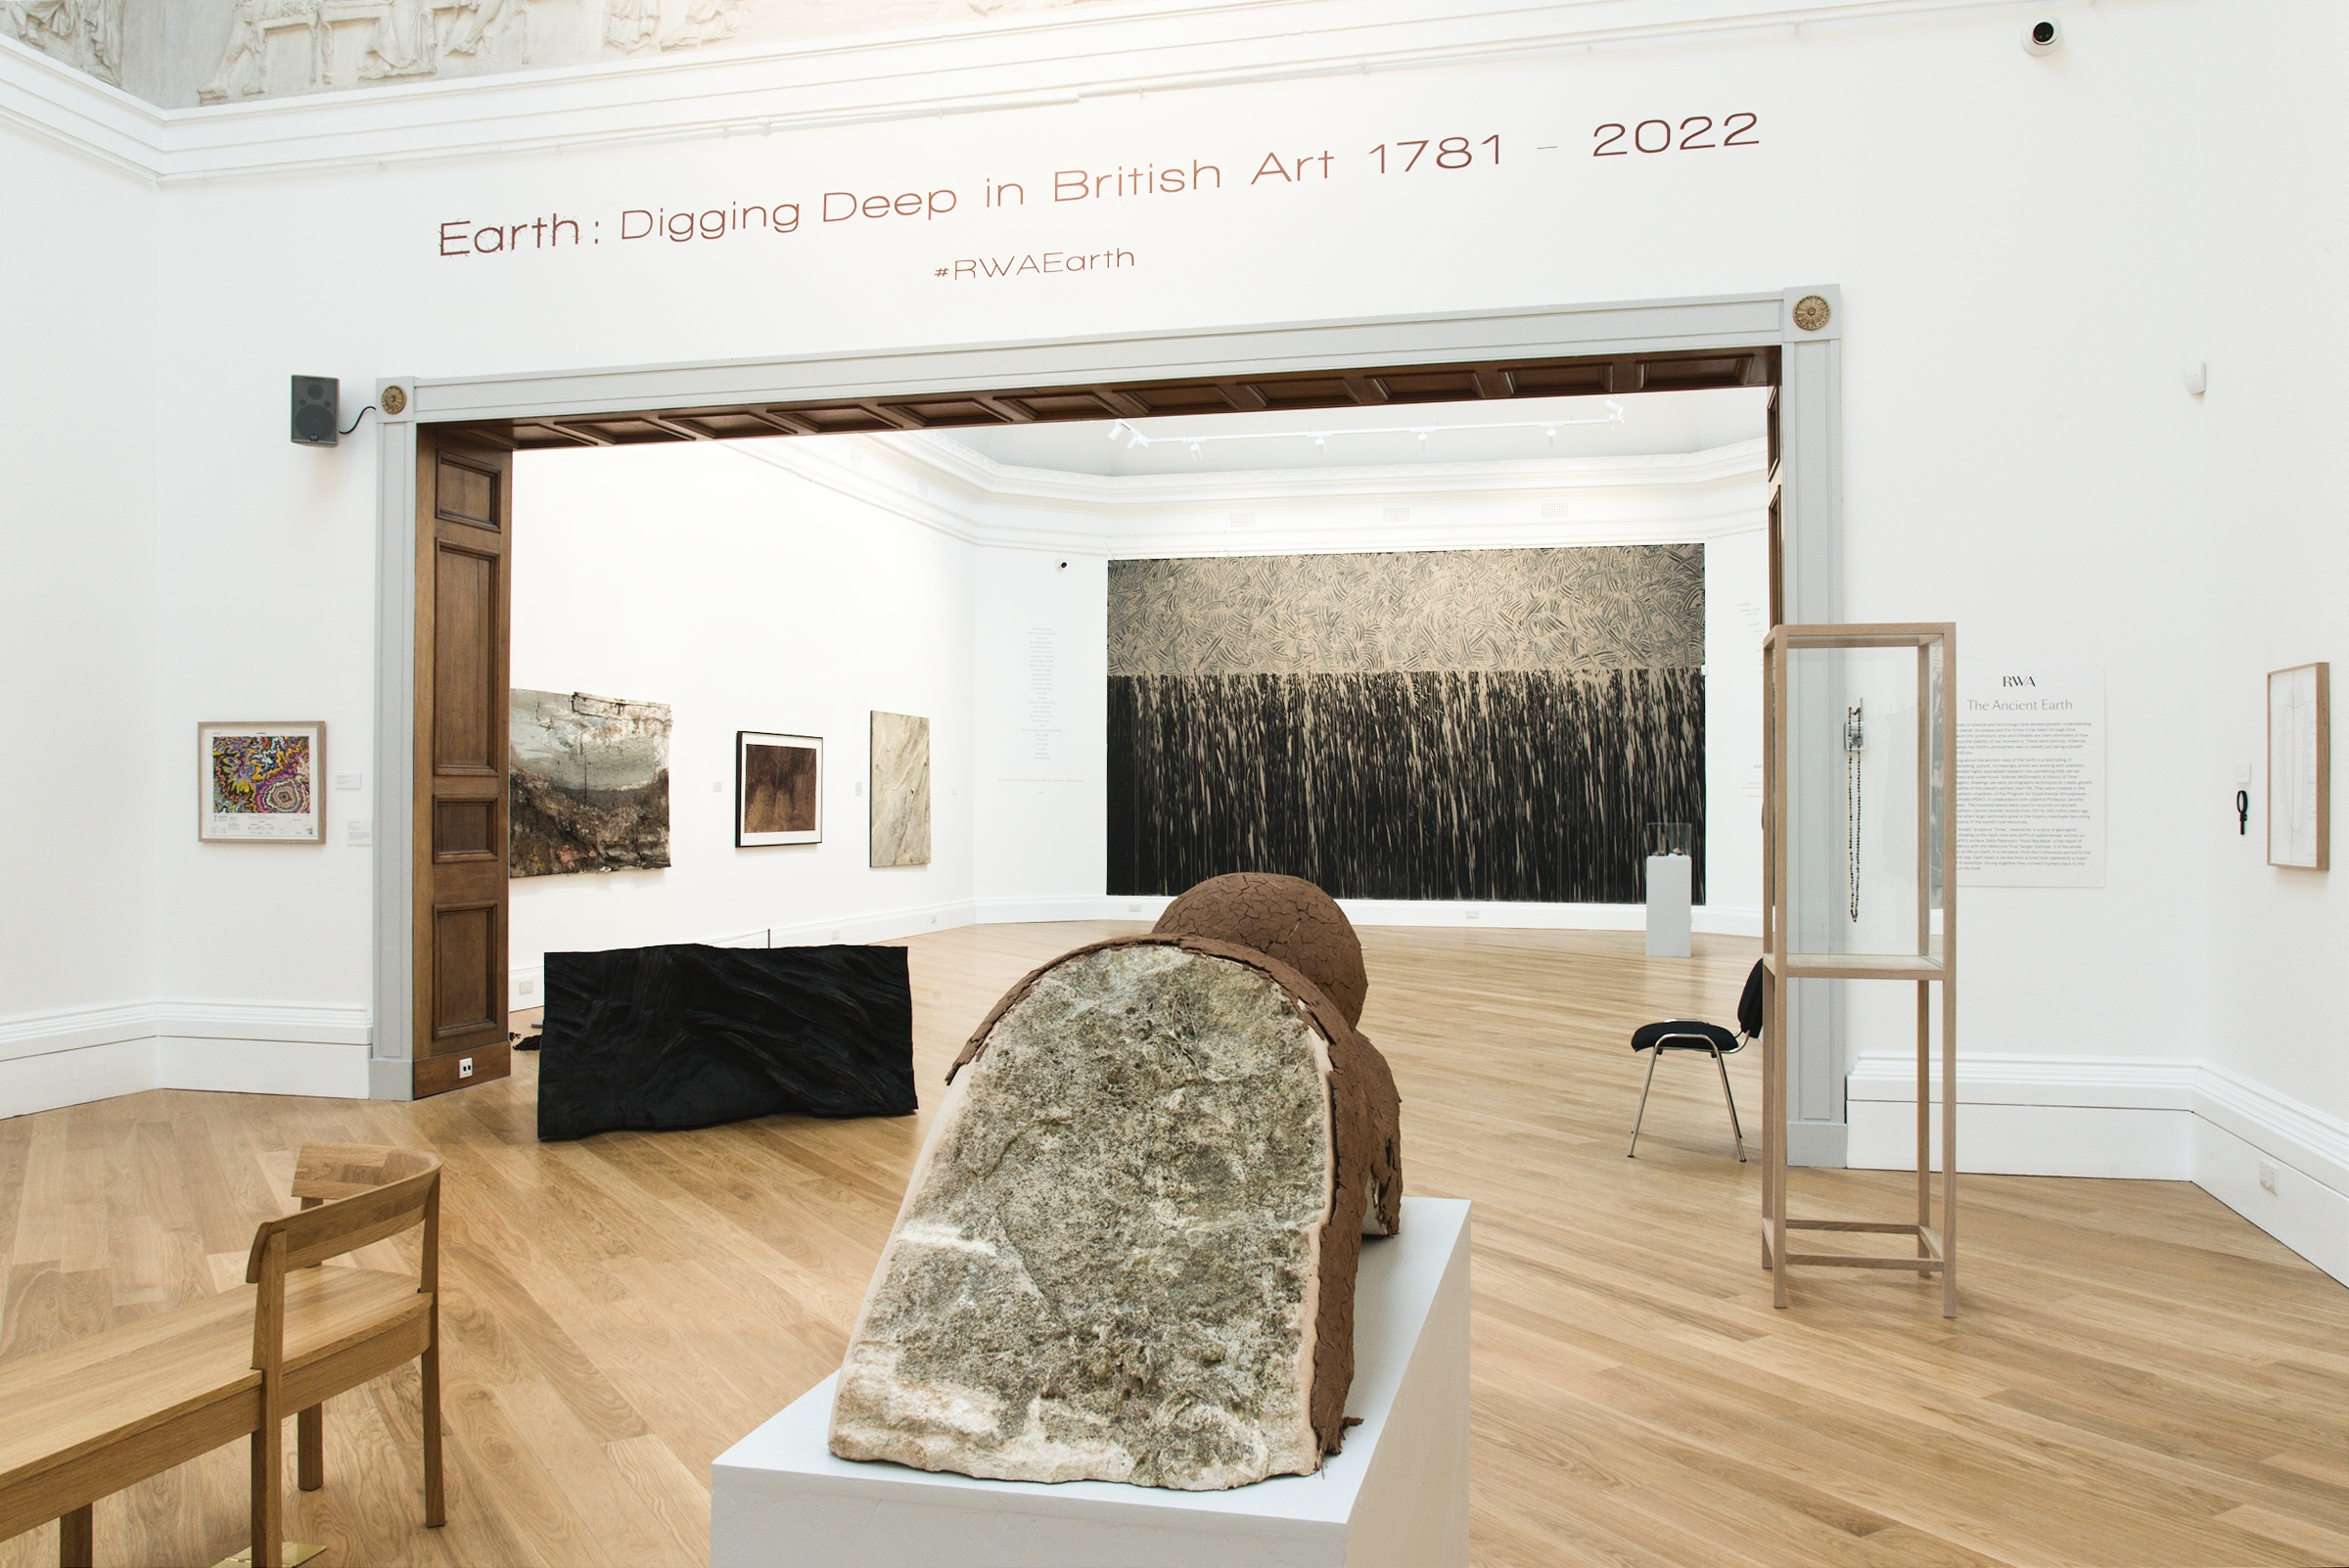 The gallery space during the Summer exhibition 2022: Earth: Digging Deep in British Art 1781 - 2022 